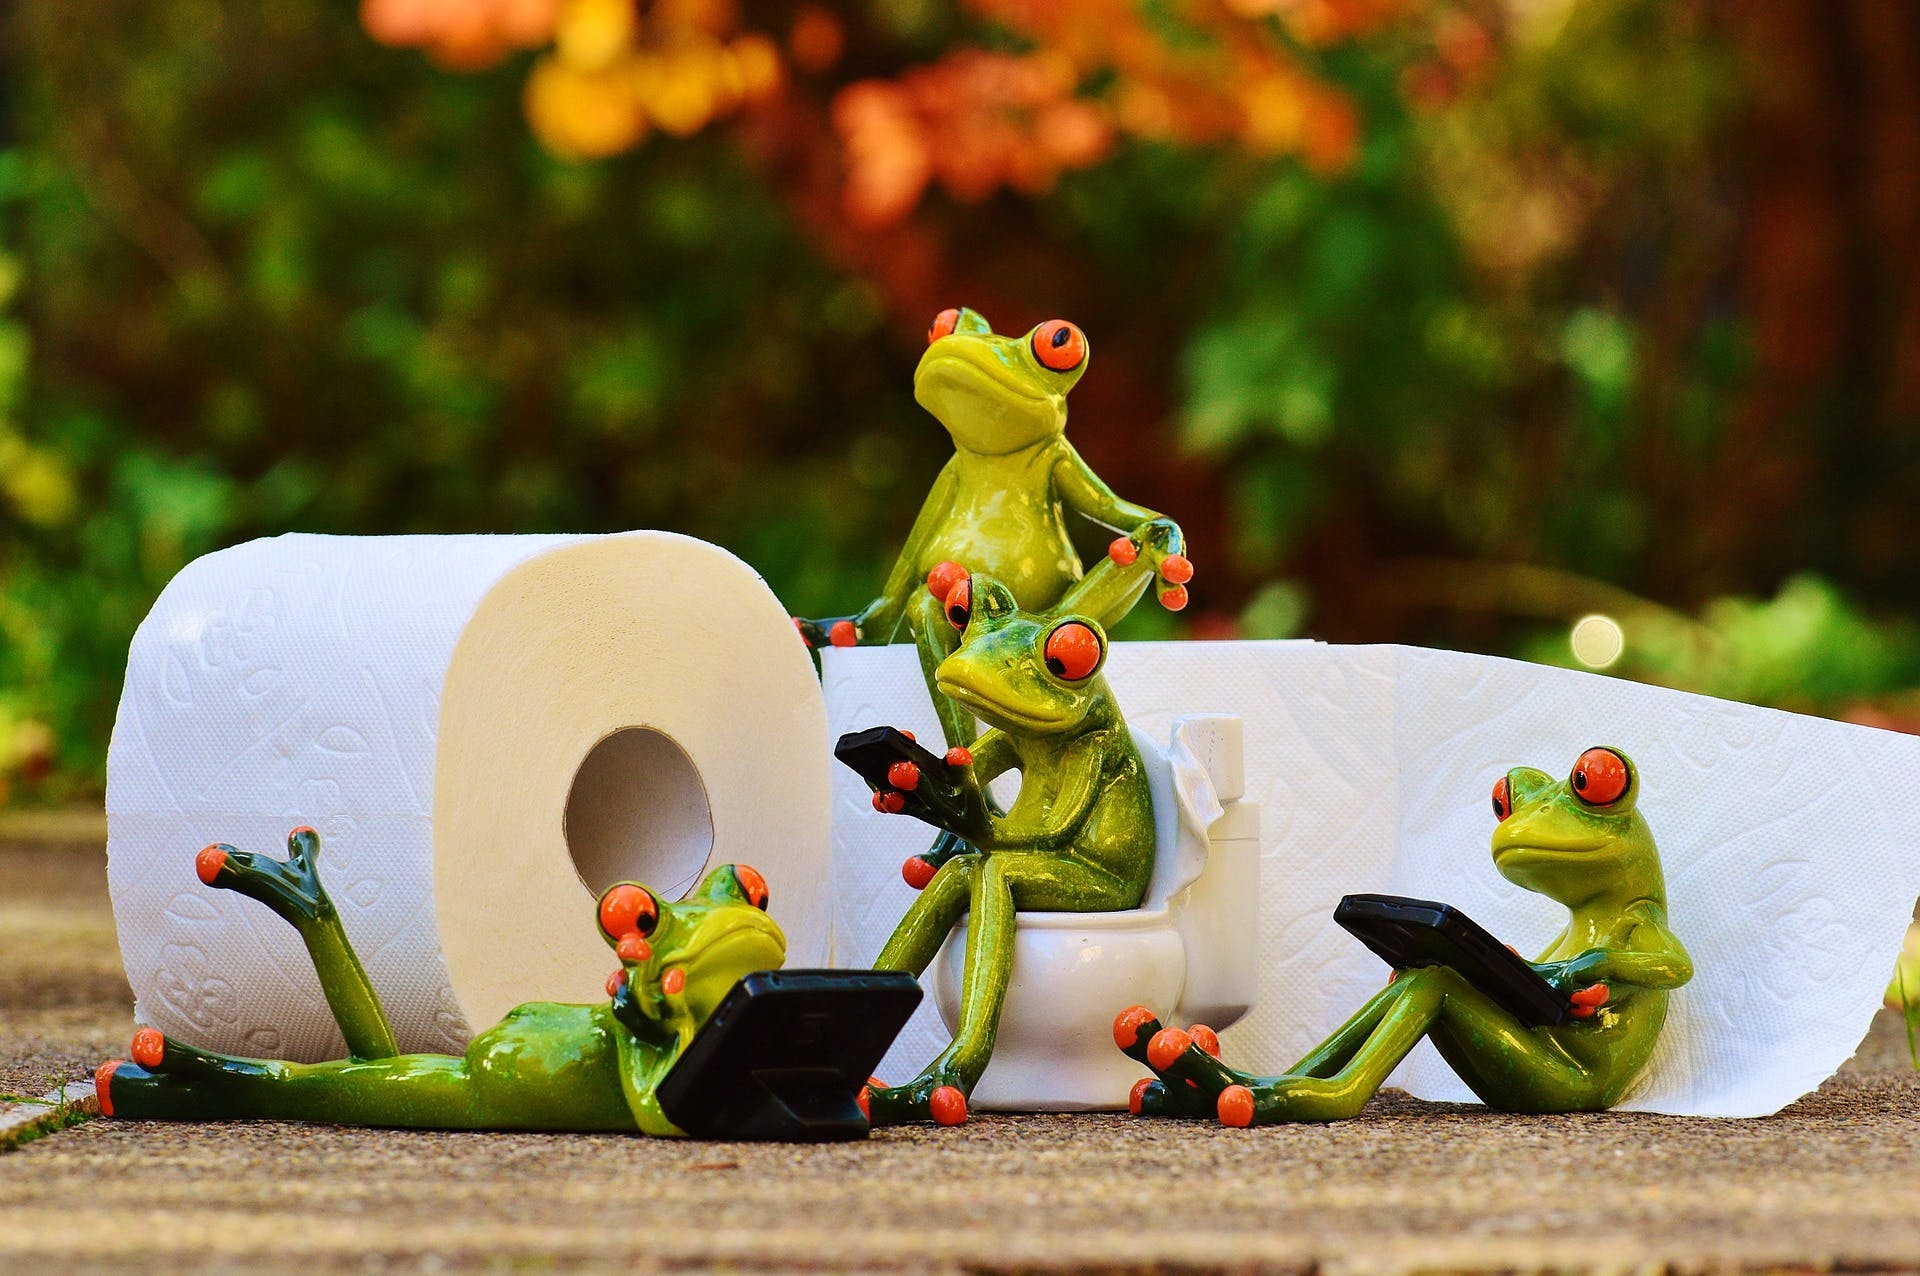 Green,Figurine,Animation,Frog,Organism,Toy,Action figure,Grass,Amphibian,Photography